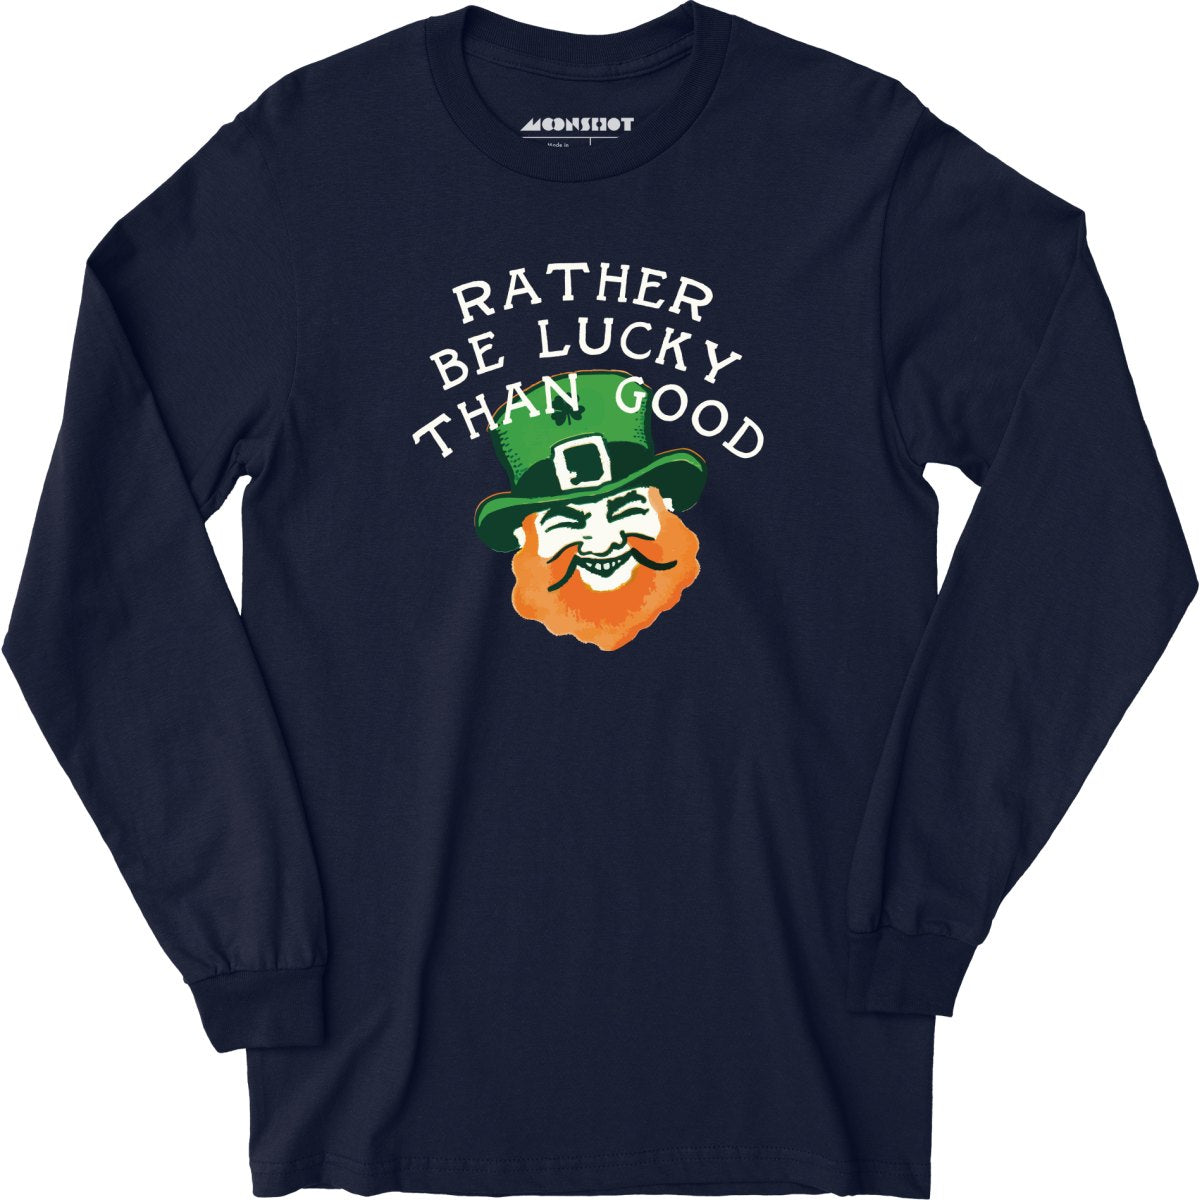 Rather Be Lucky Than Good - Long Sleeve T-Shirt